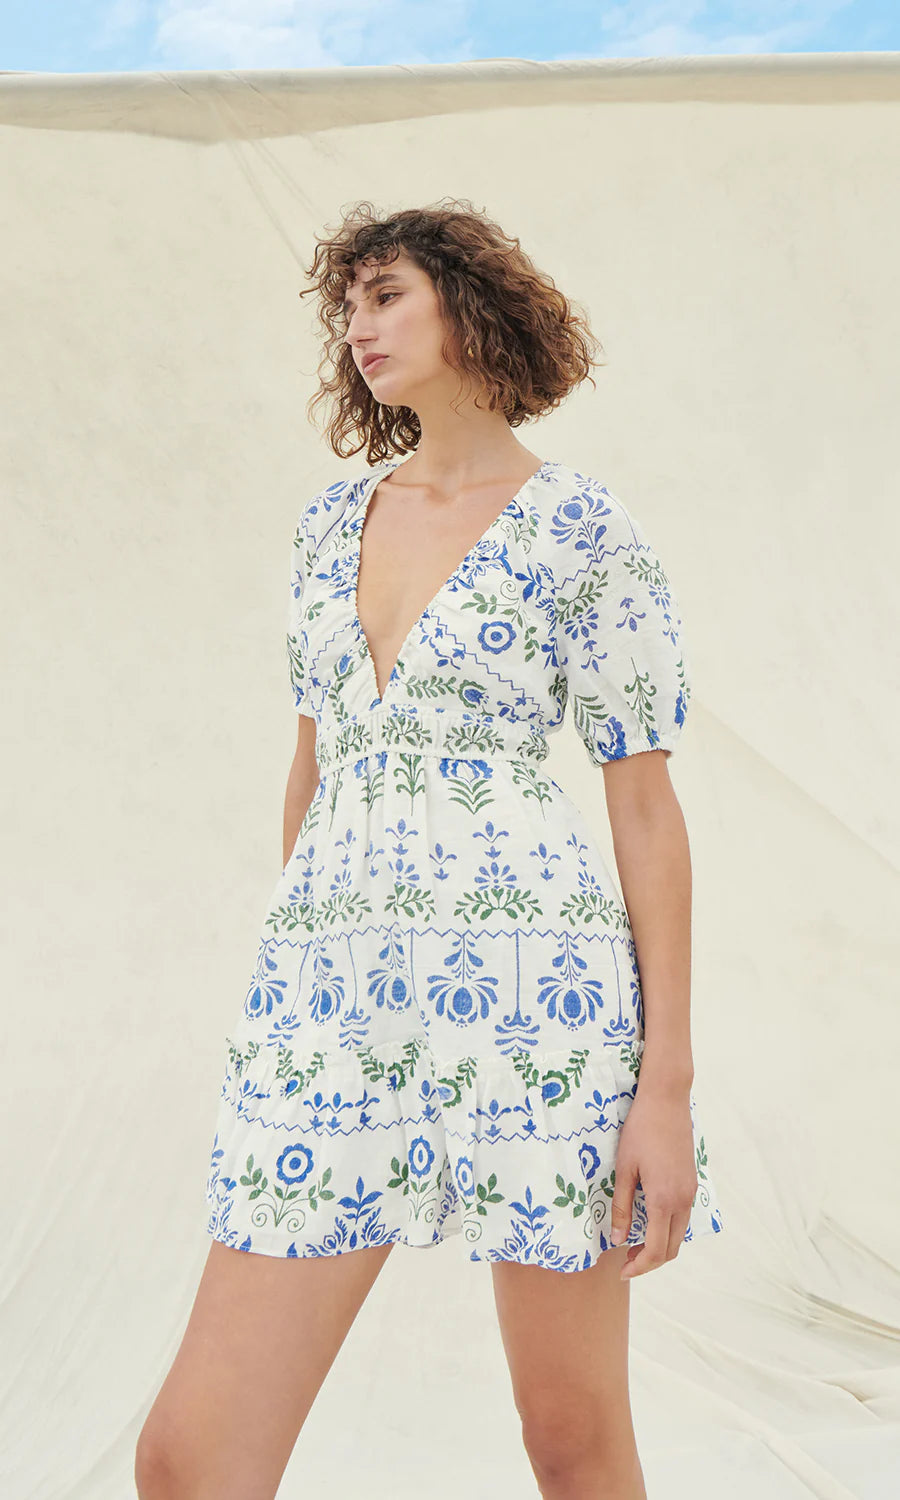 Gracey Floral Mini Dress by Saylor at waterlilyshop.com